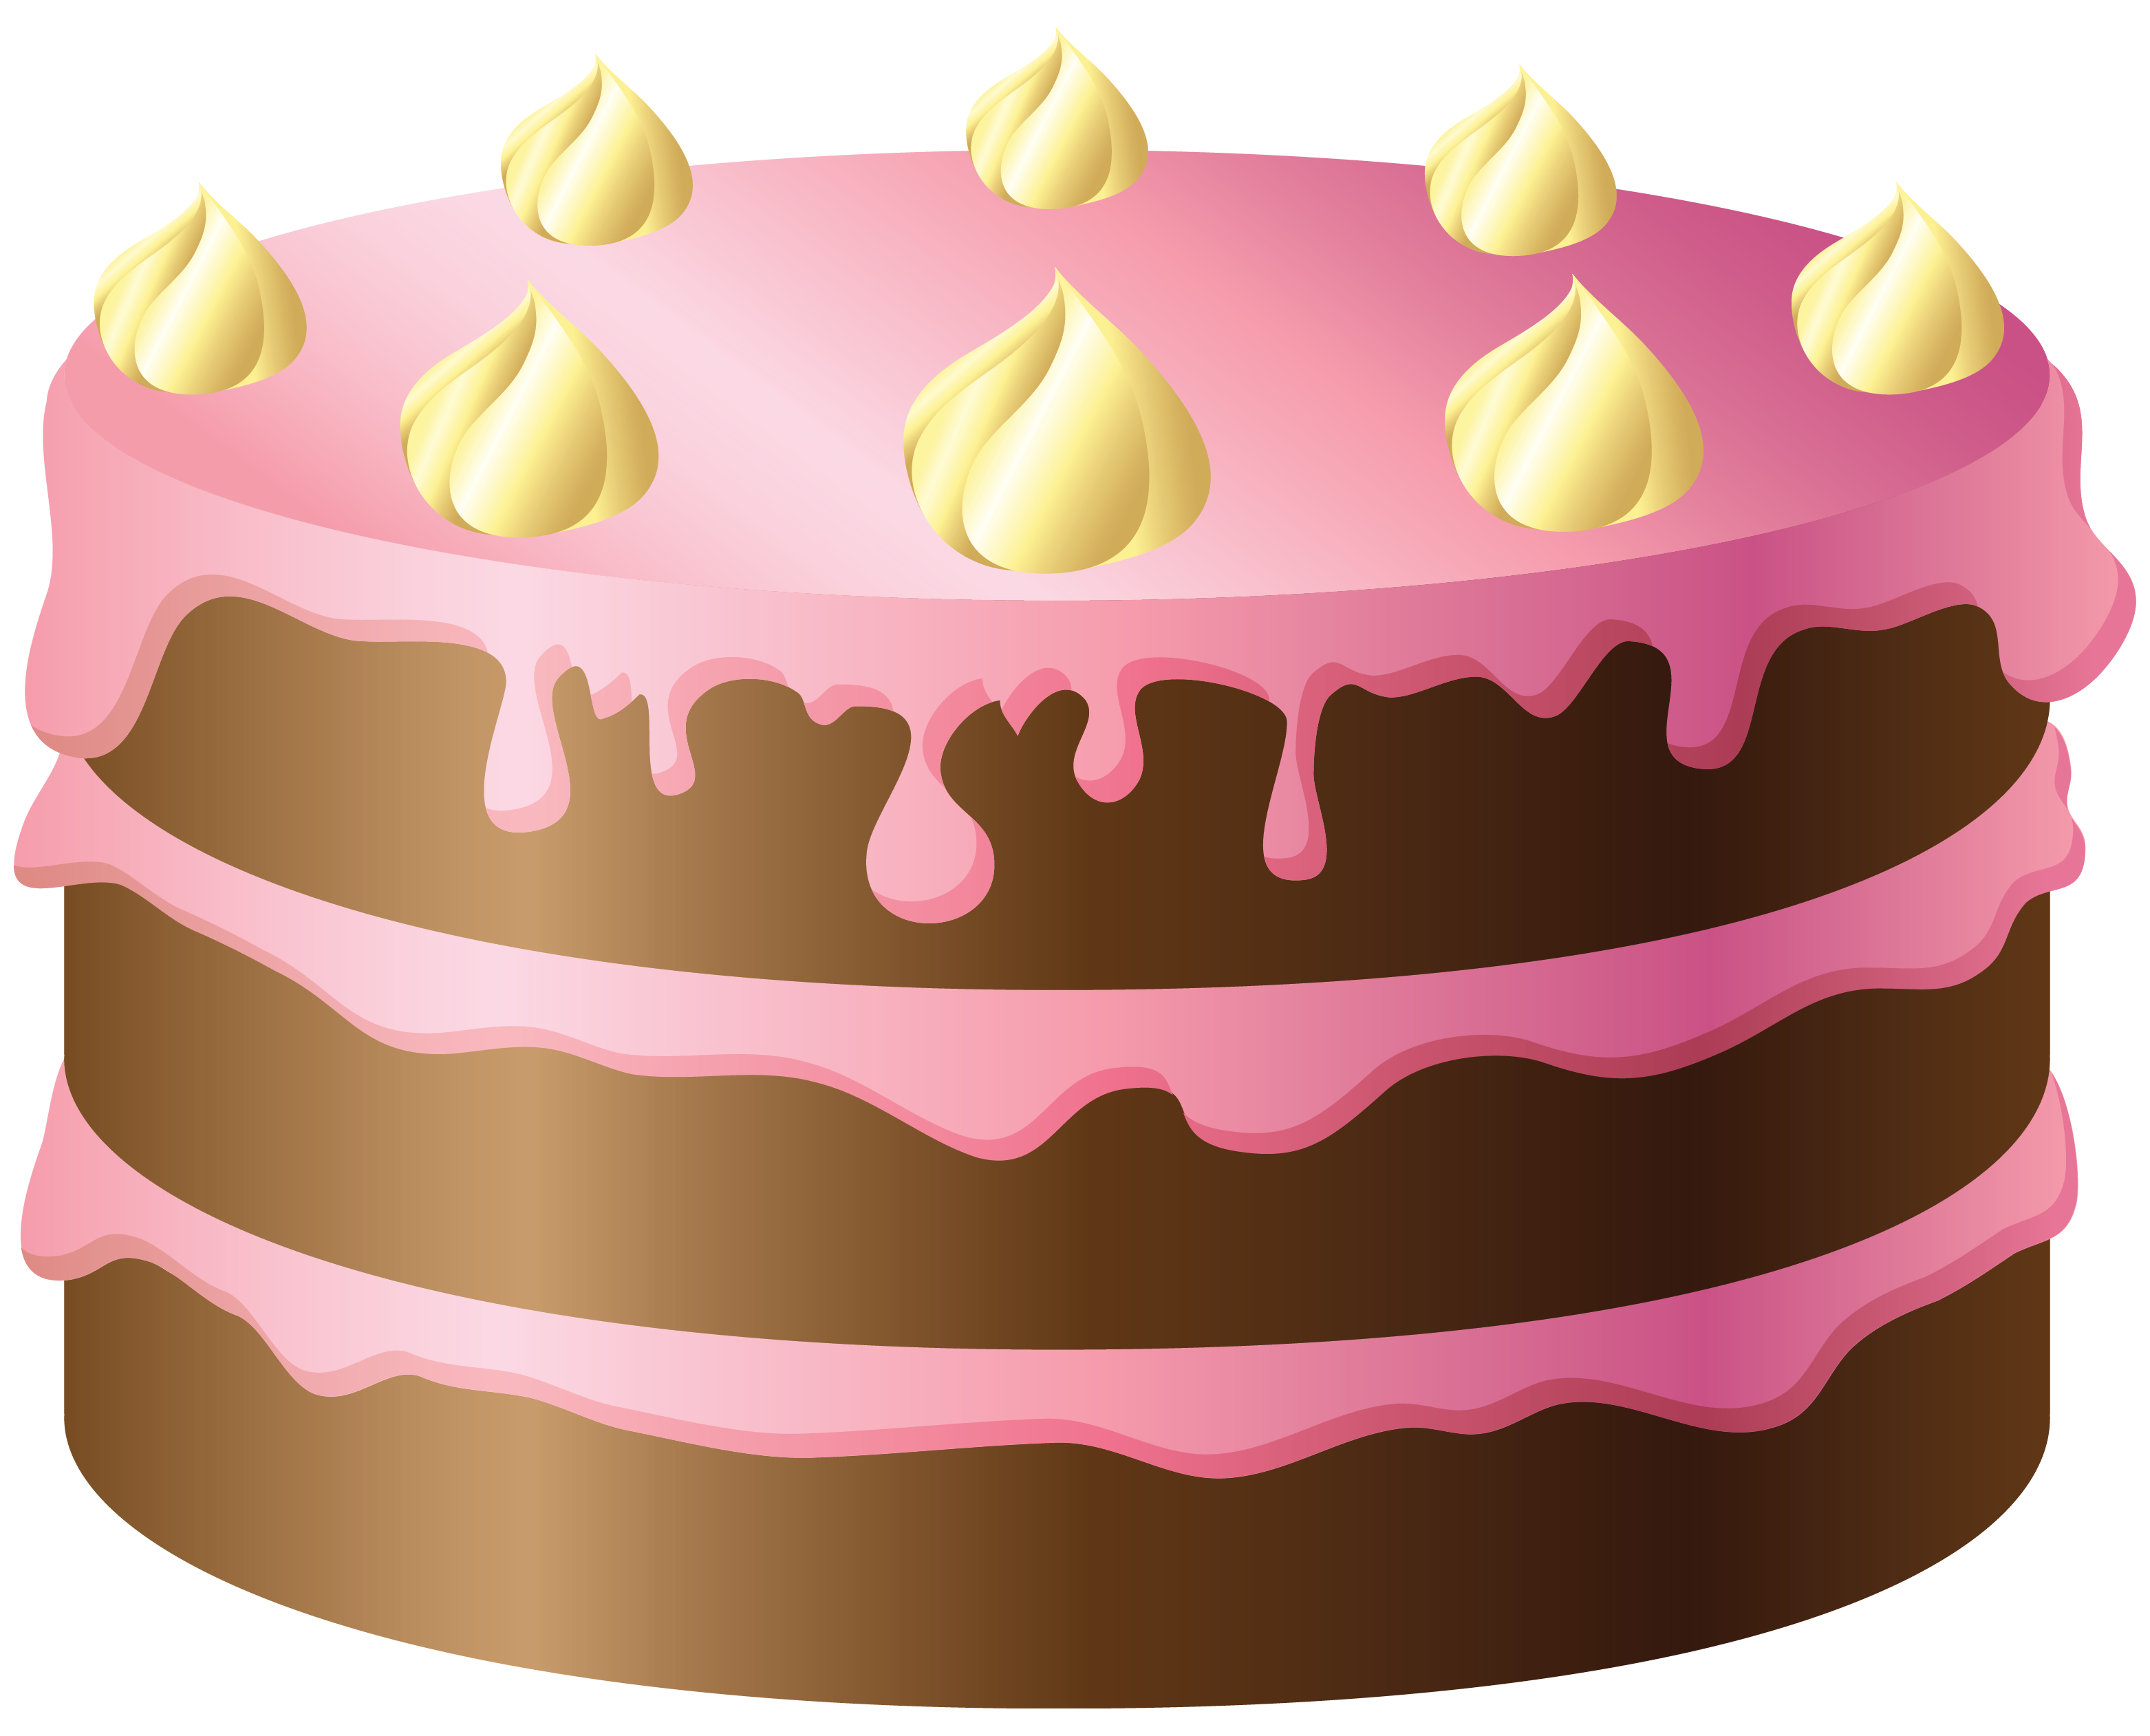 1st birthday cake clipart fre - Cakes Clipart